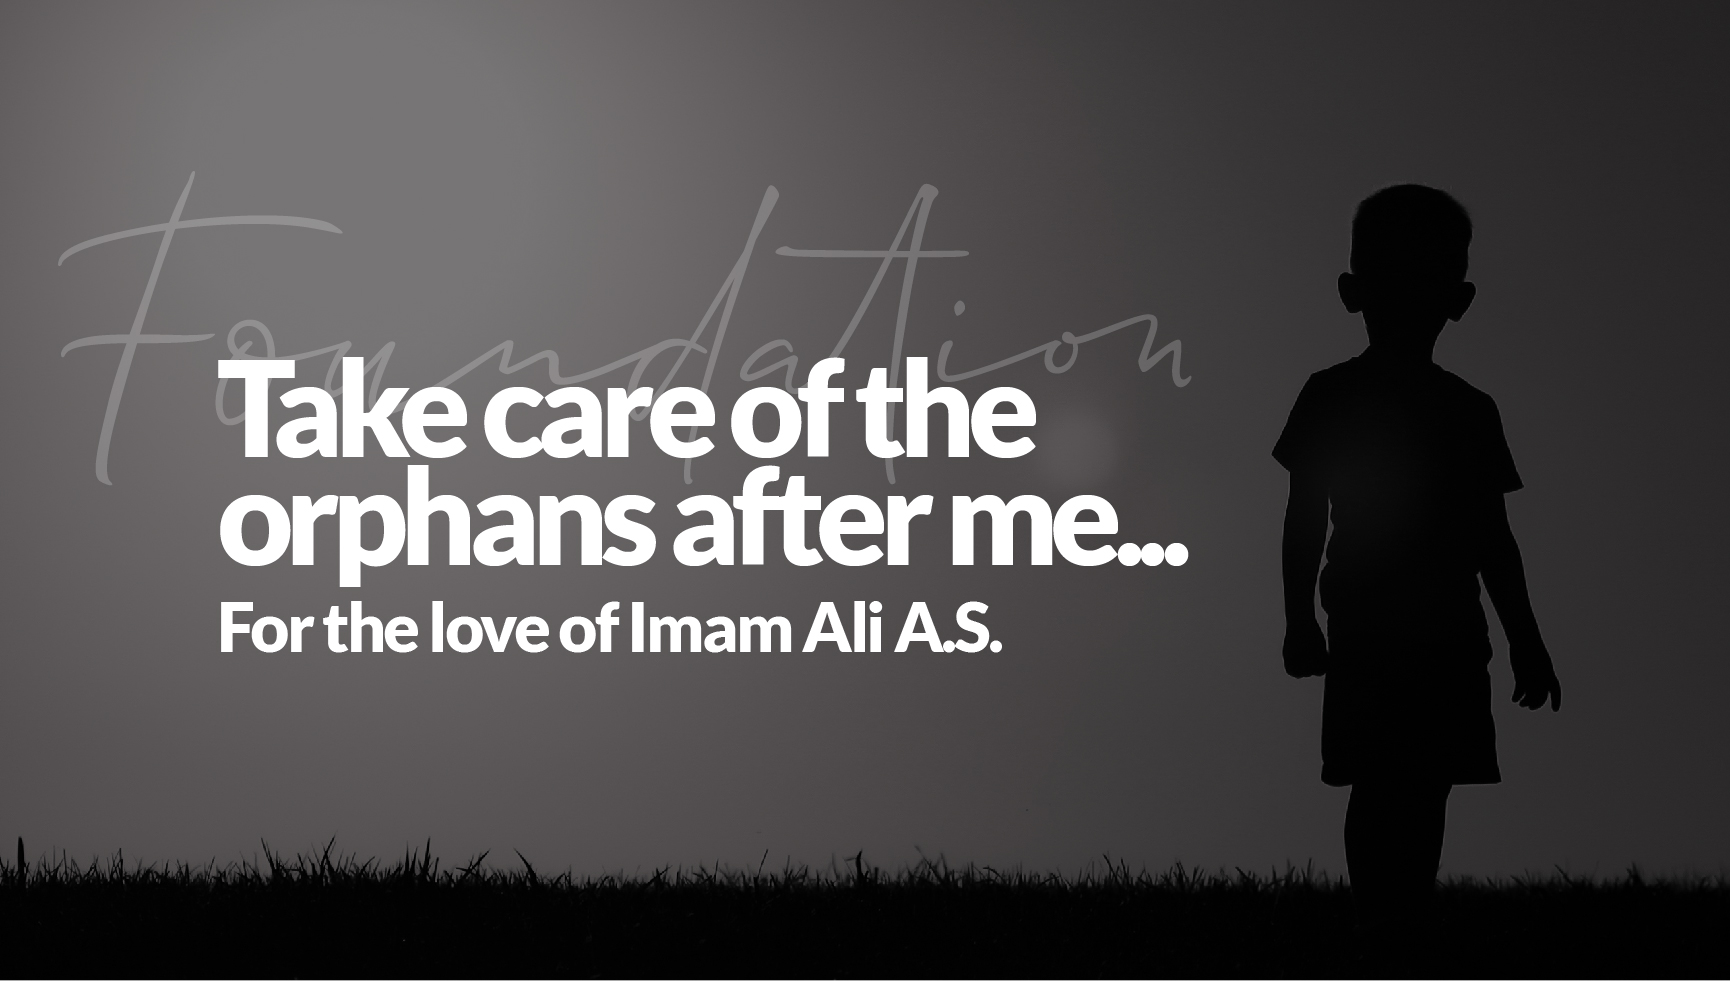 Imam Ali A.S. take care of the orphans after me …